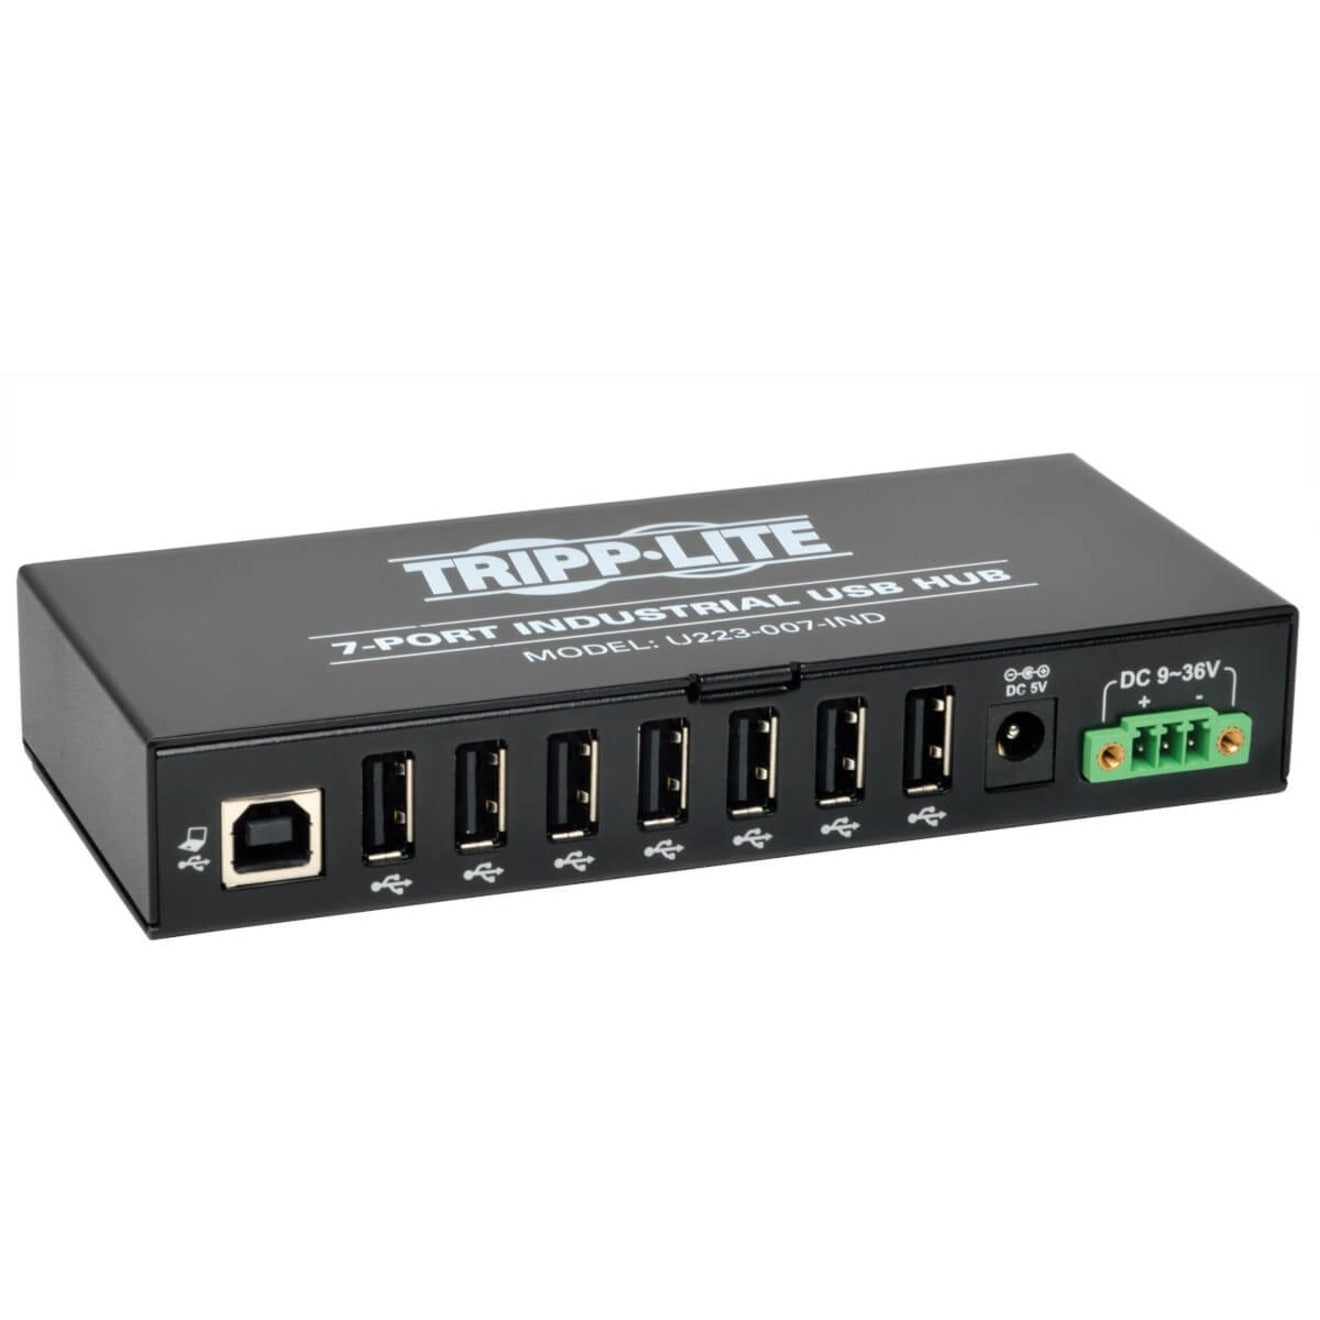 Tripp Lite U223-007-IND 7-Port Industrial USB 2.0 Hub with 15kV ESD Immunity, High-Speed Data Transfer and ESD Protection